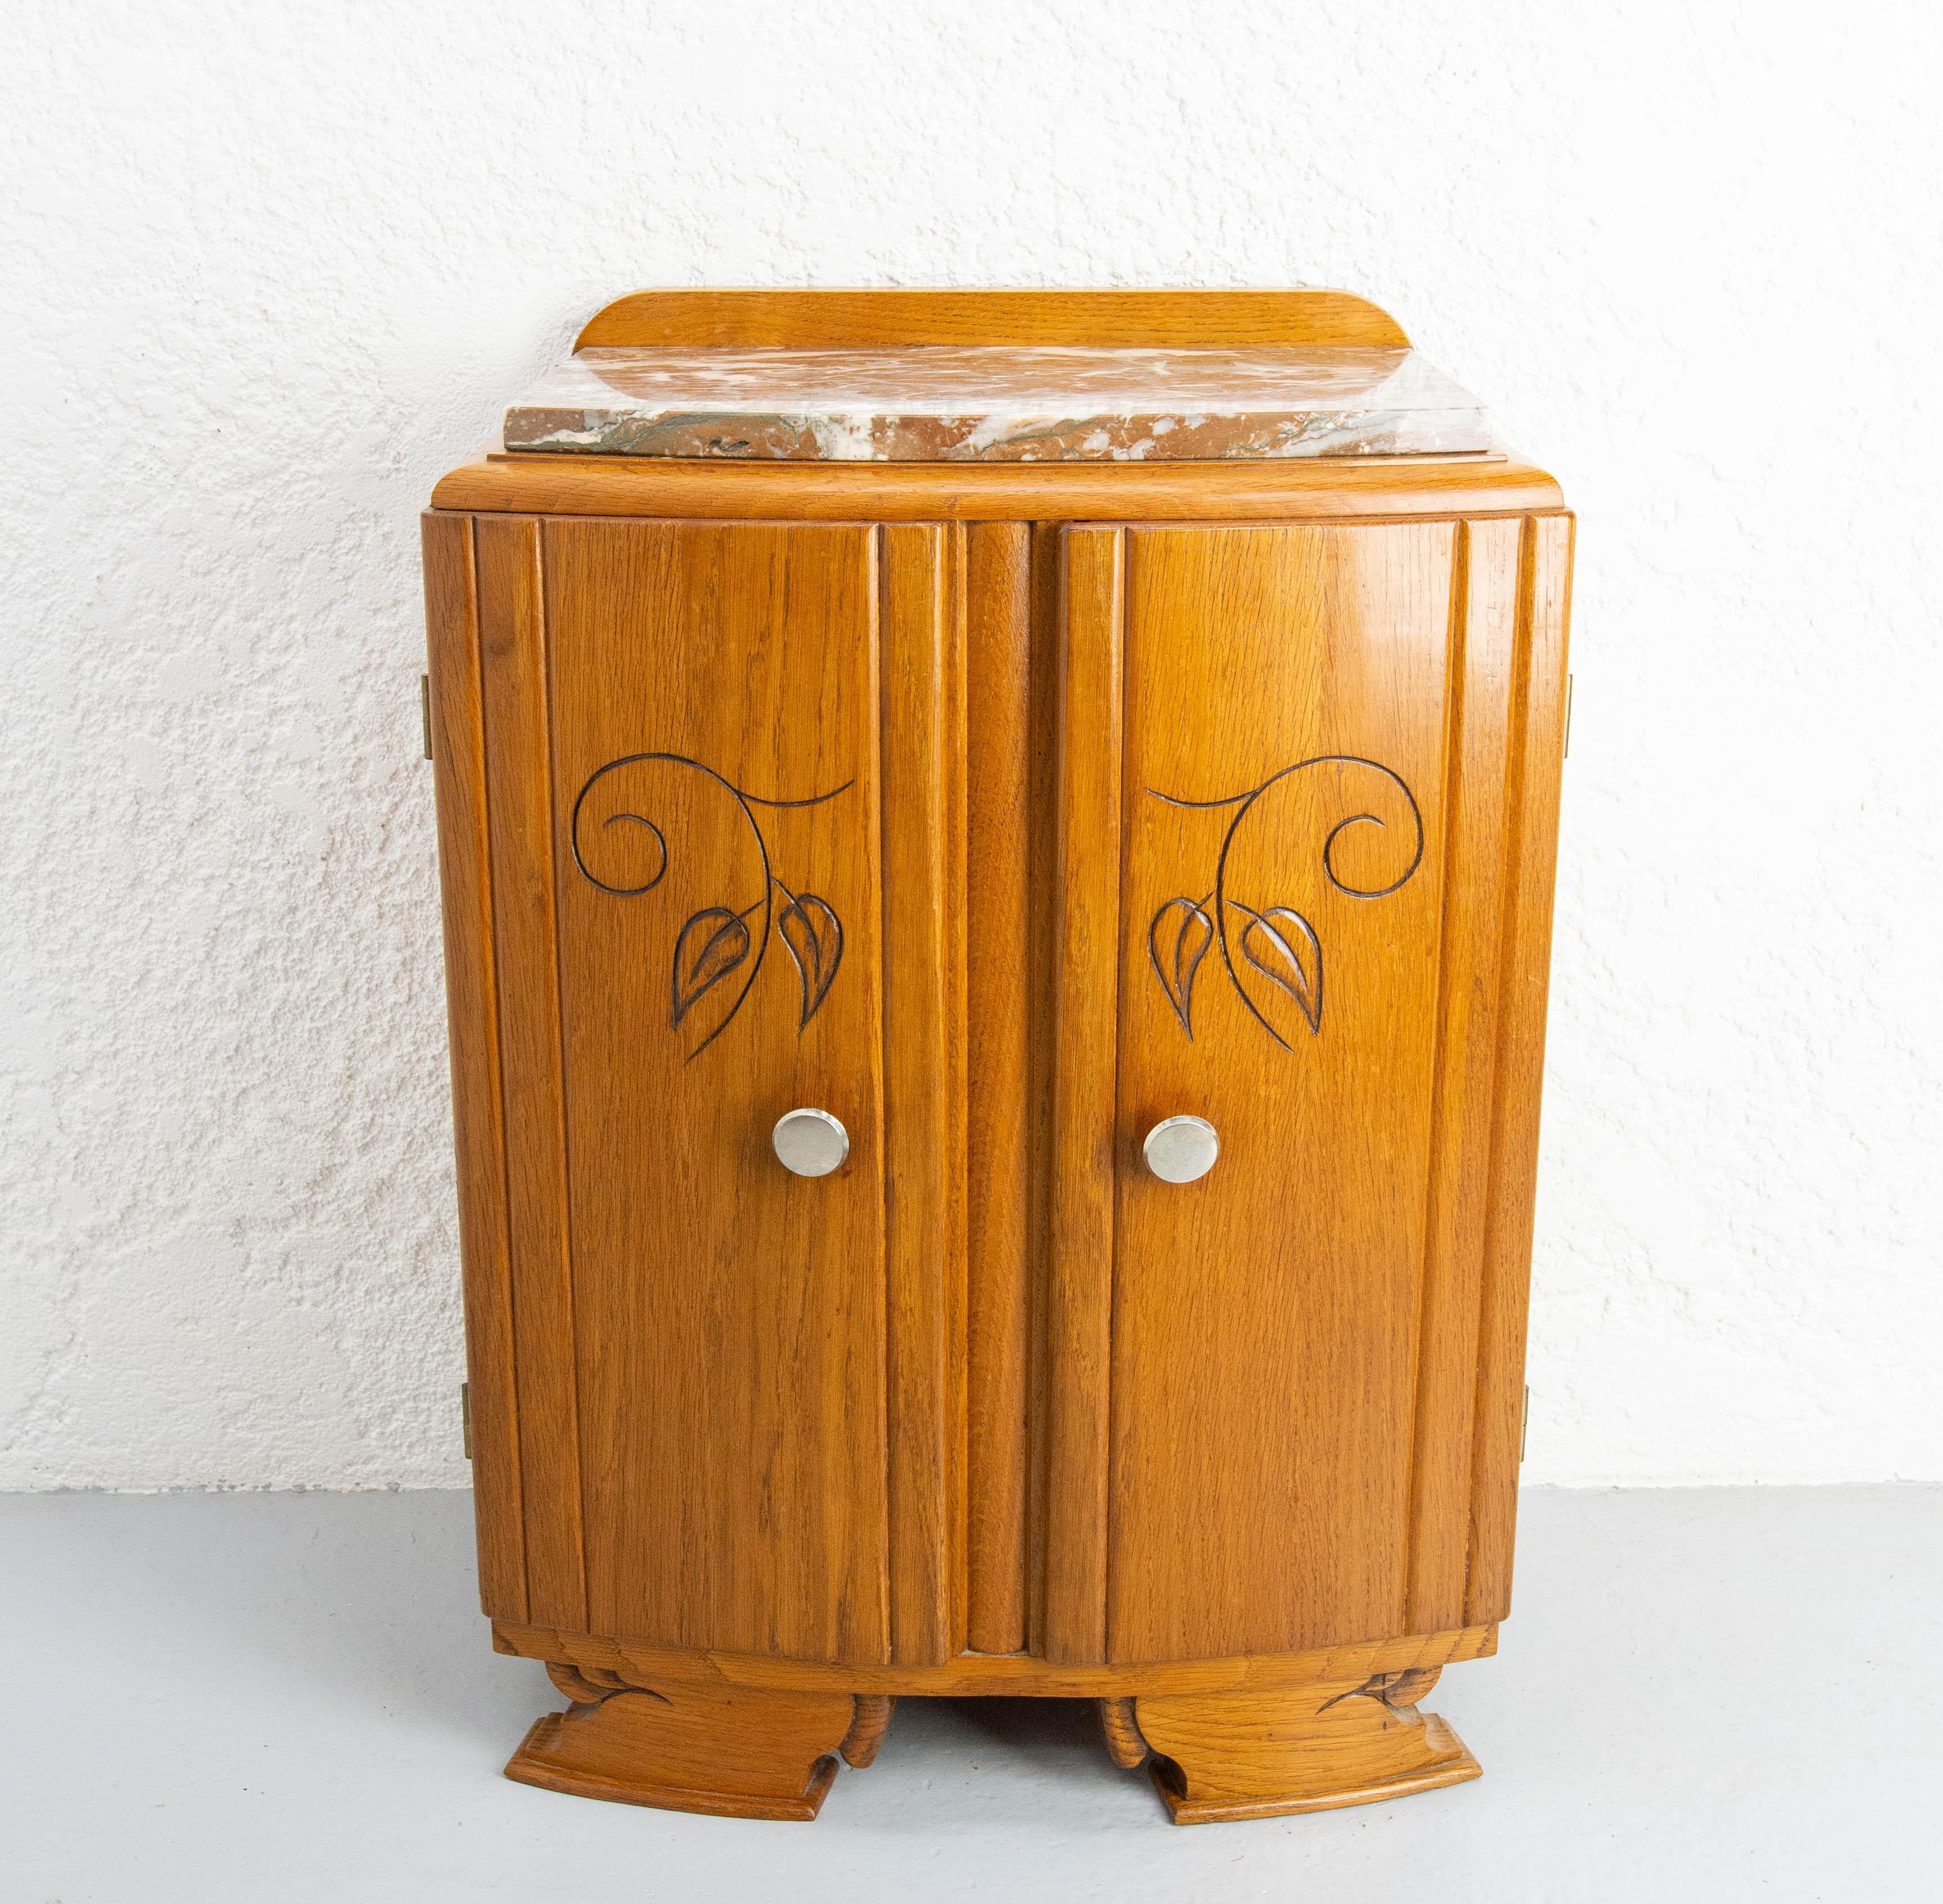 Vintage commode in the typical style of the sixties, French little cabinet with two doors and one shelf inside, circa 1960. Oak, marble top and chrome buttoms.

The small size of this cabinet makes it ideal for a small corner in a house or a small